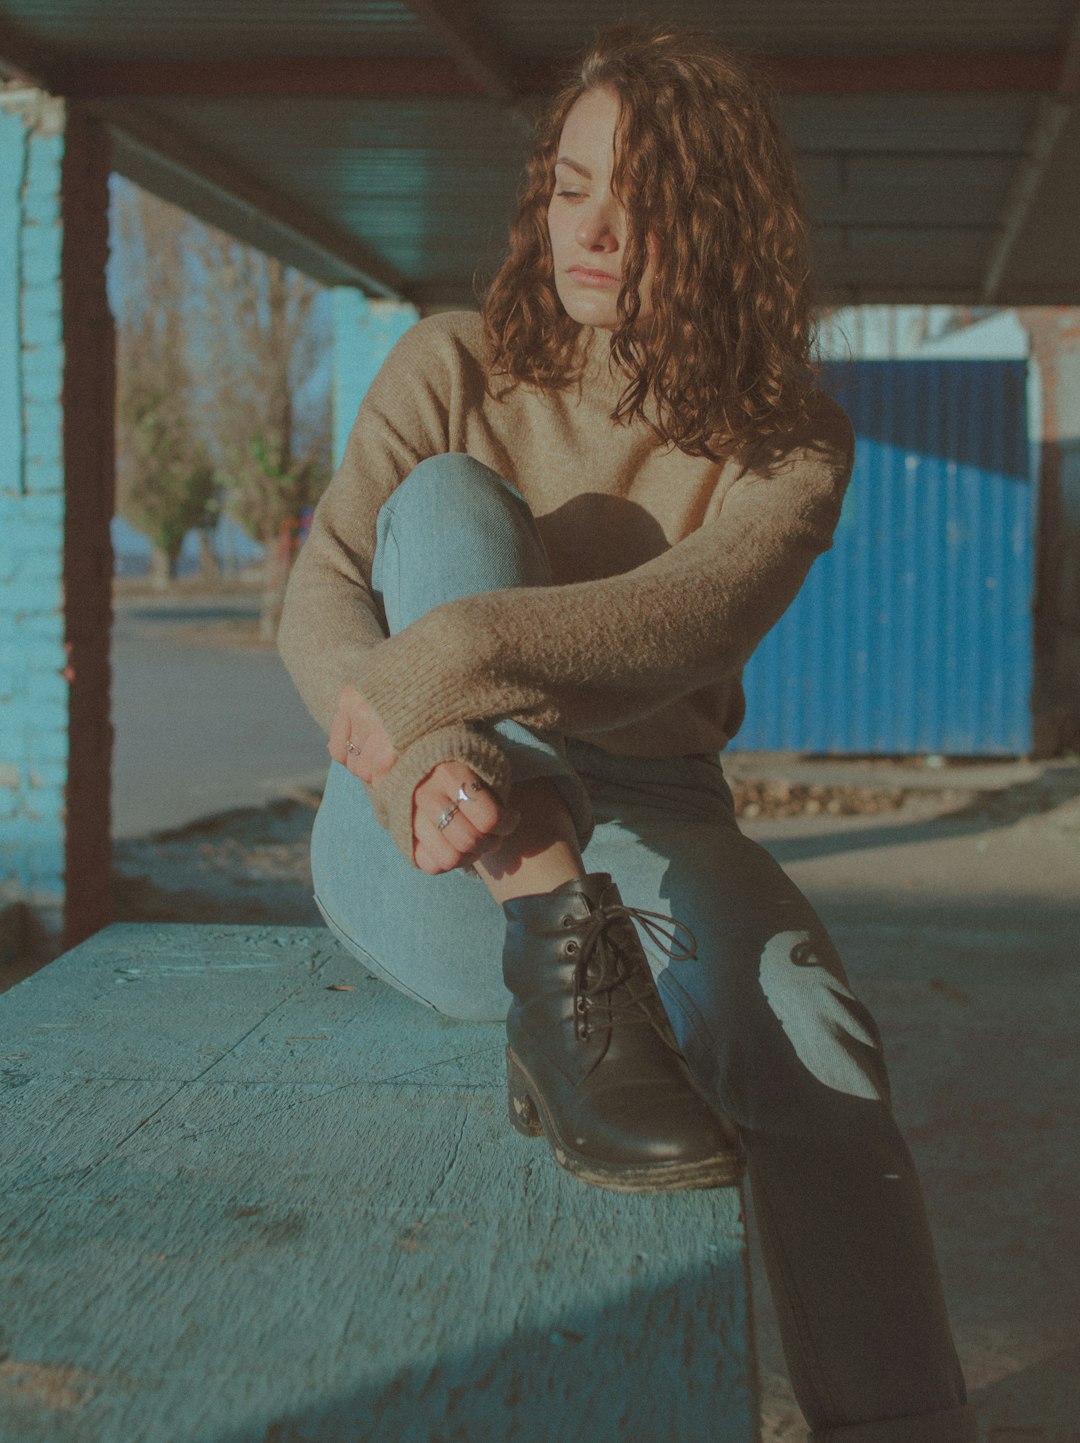 woman in gray long sleeve shirt and black pants sitting on gray concrete floor during daytime